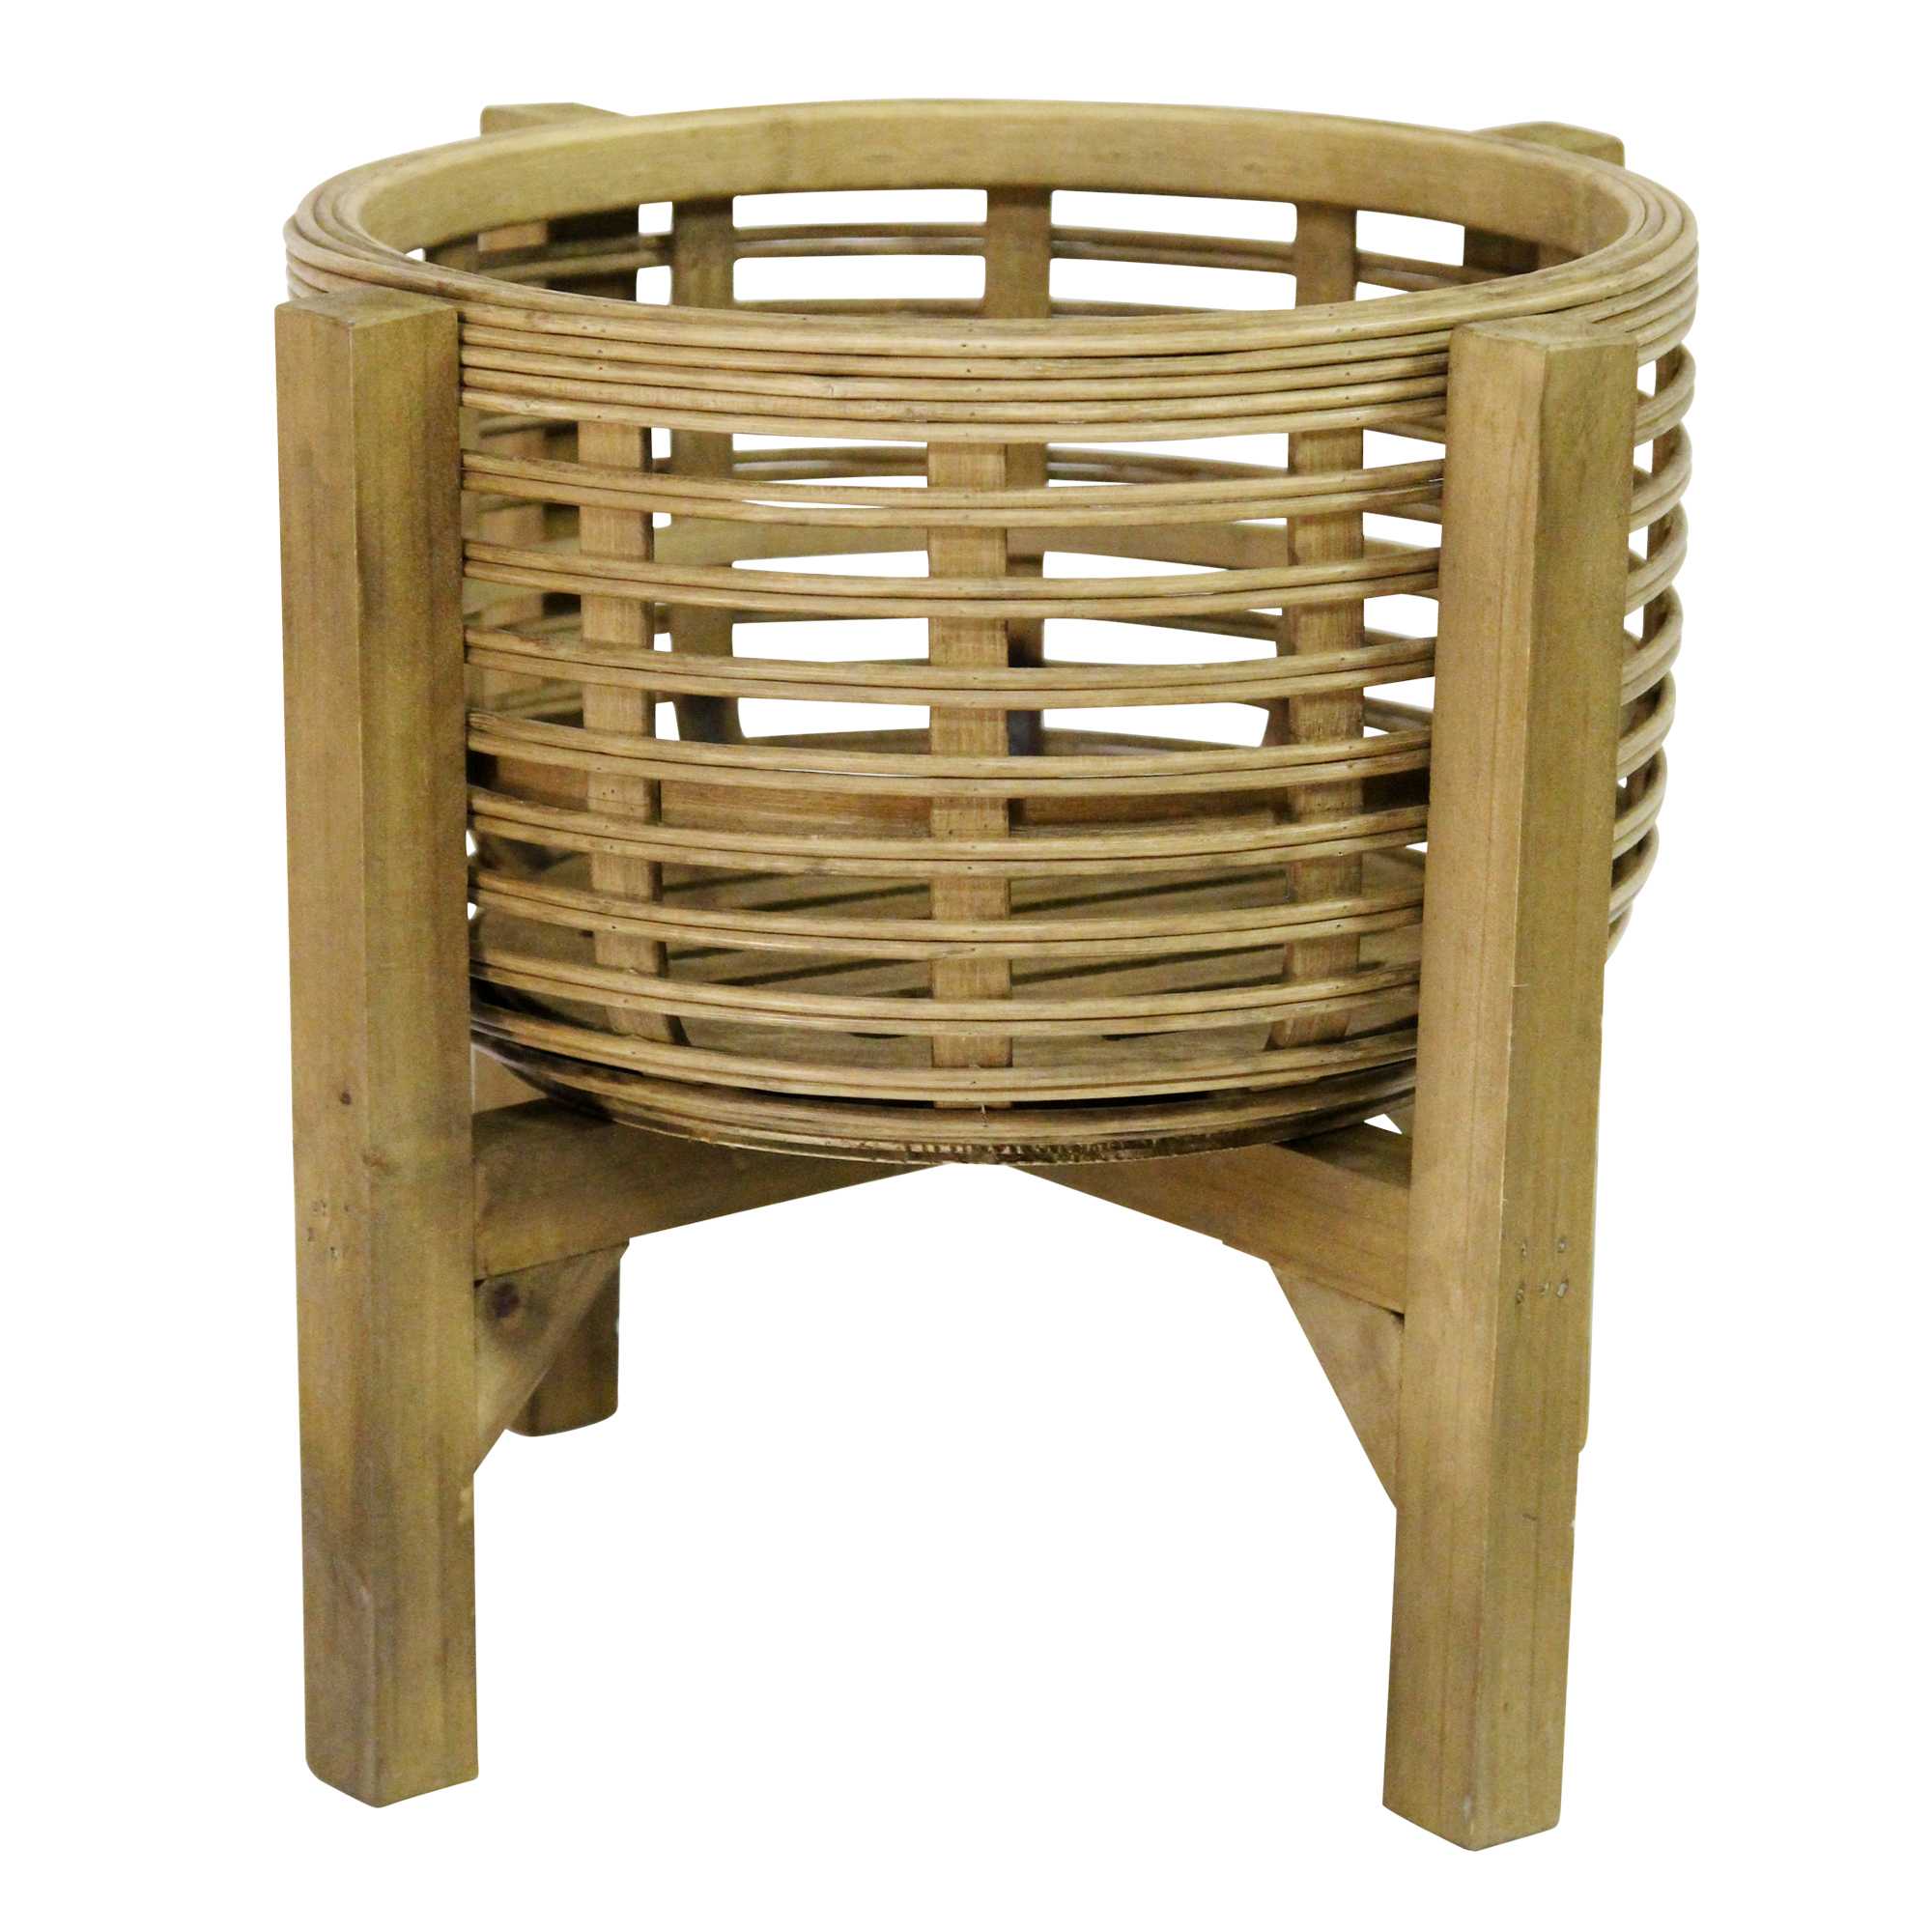 12.8" X 12.8" X 11.5" Natural Wood 8 Bamboo 1 Wood Plant Stand